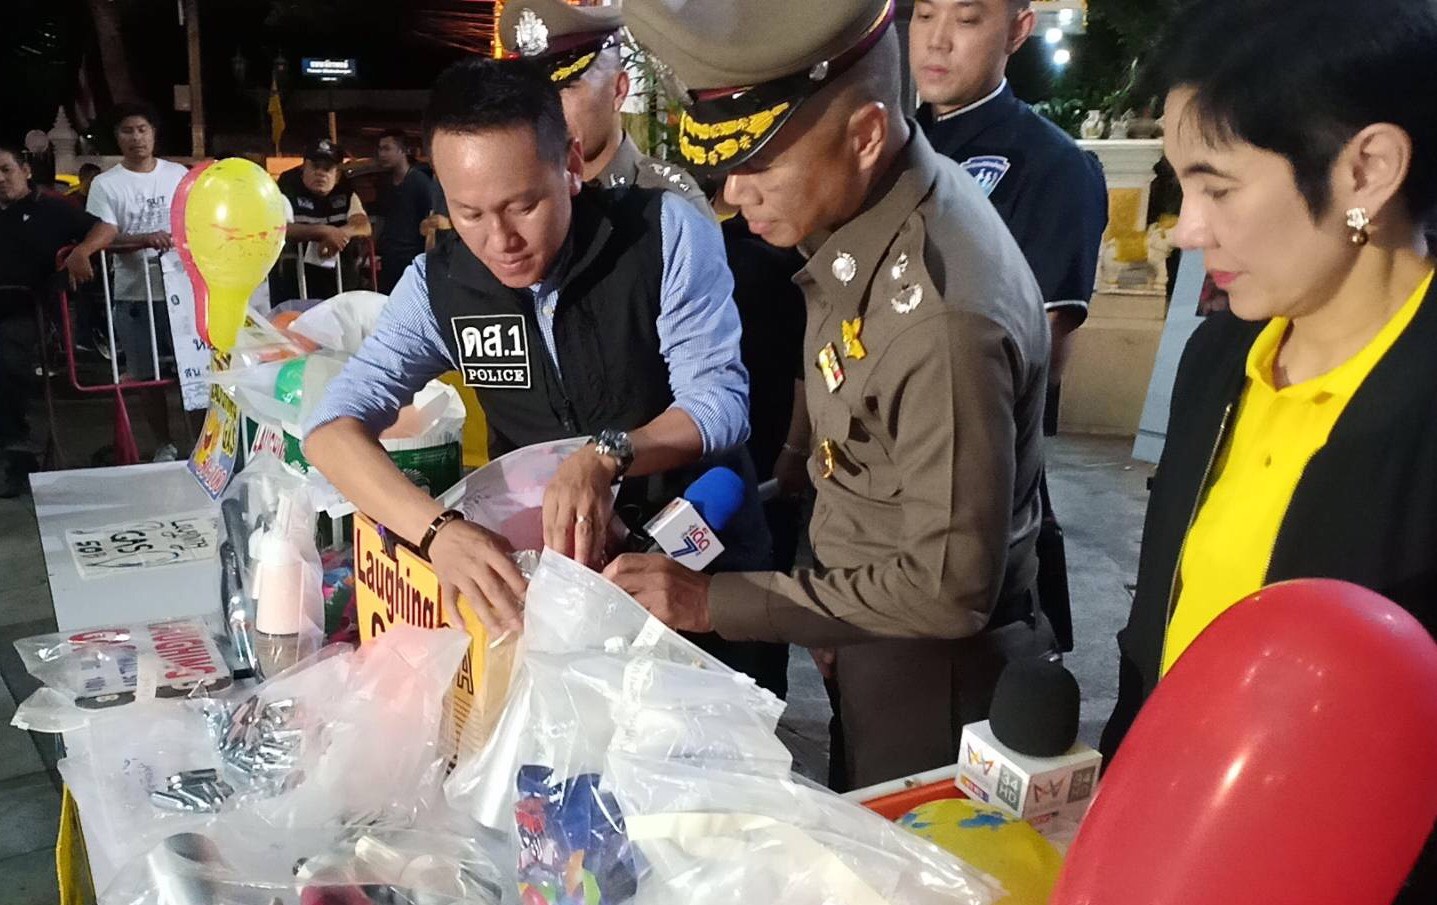 Officials examining the seized evidences on July 11.